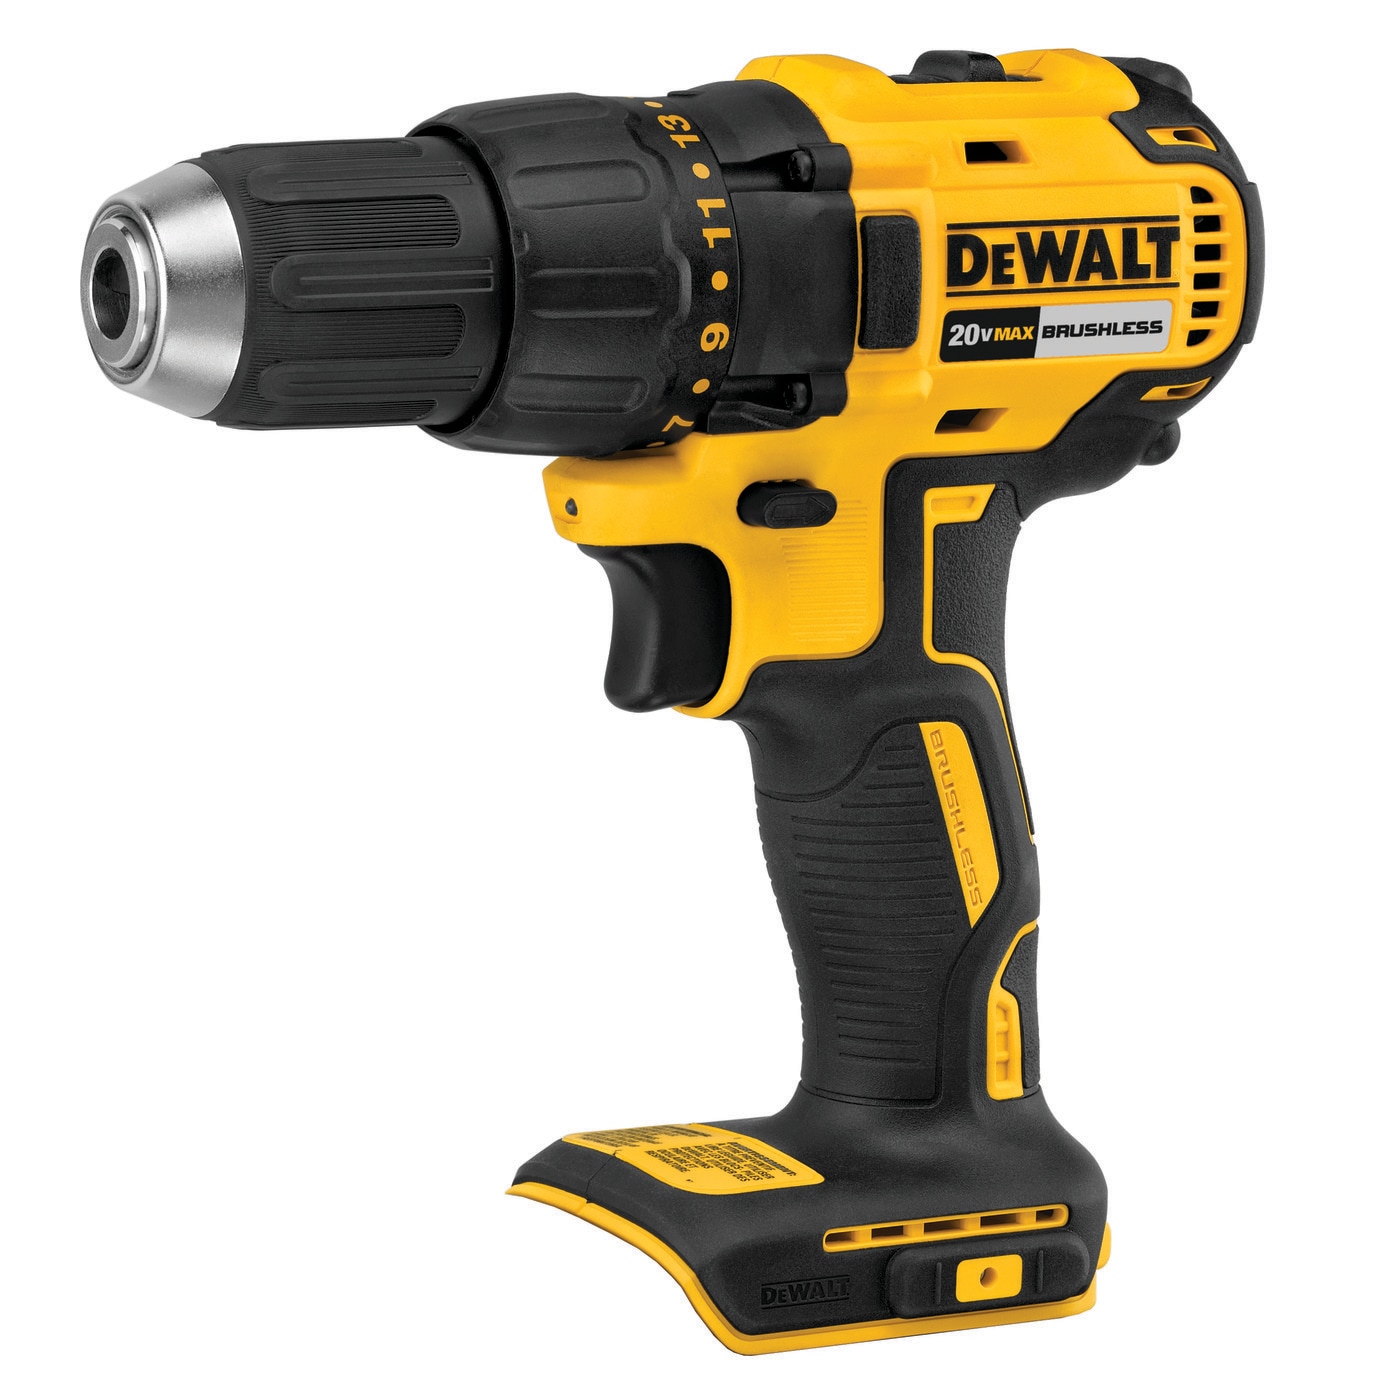 DEWALT 20-volt Max 1/2-in Brushless Cordless Drill (Tool Only)